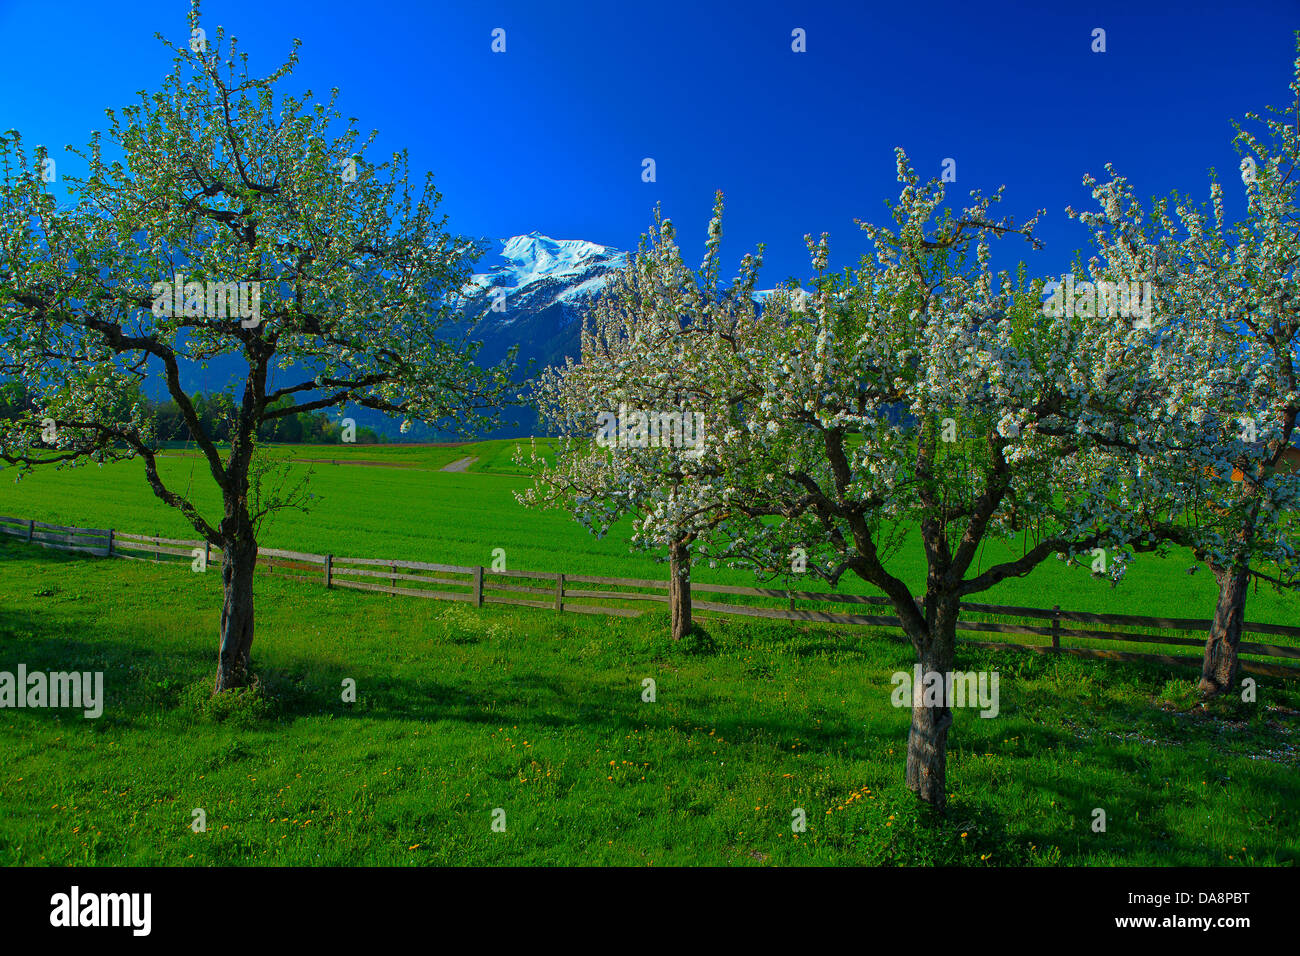 Austria, Europe, Tyrol, Mieminger plateau, Mieming, Barwies, spring, trees, blossoms, flourish, flower trees, orchard, mountains Stock Photo